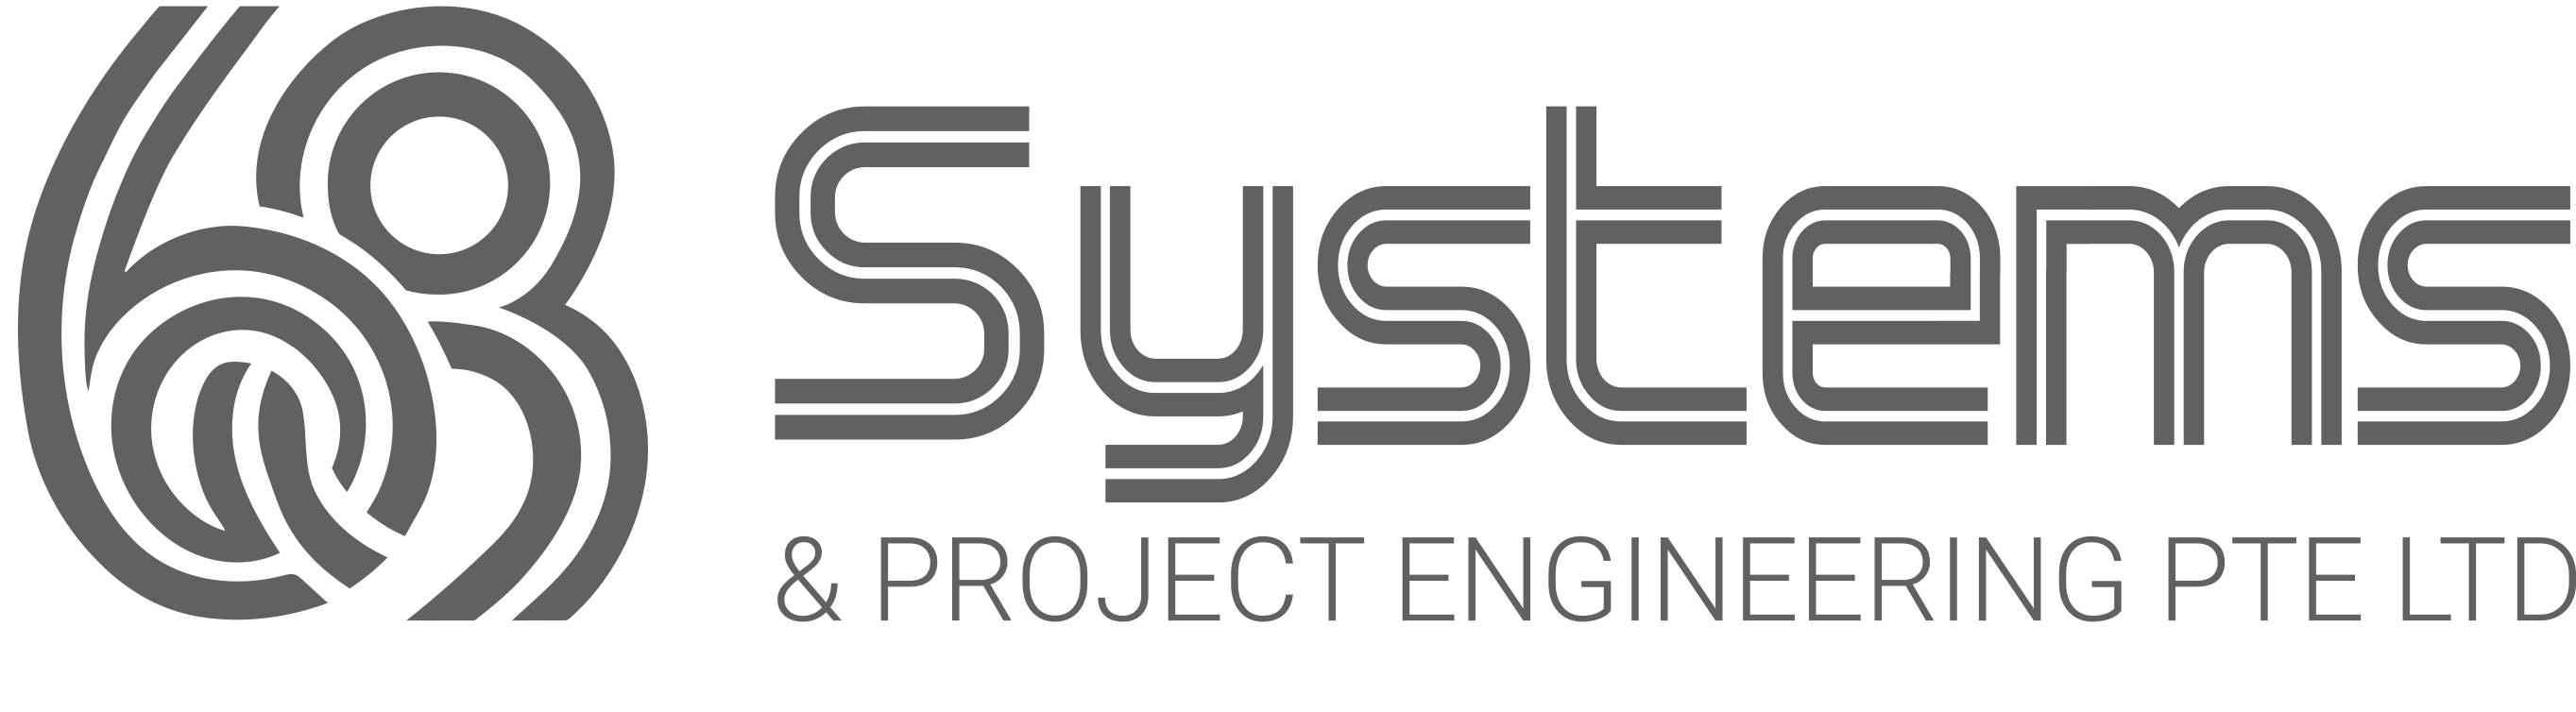 68 Systems & Project Engineering Pte. Ltd.